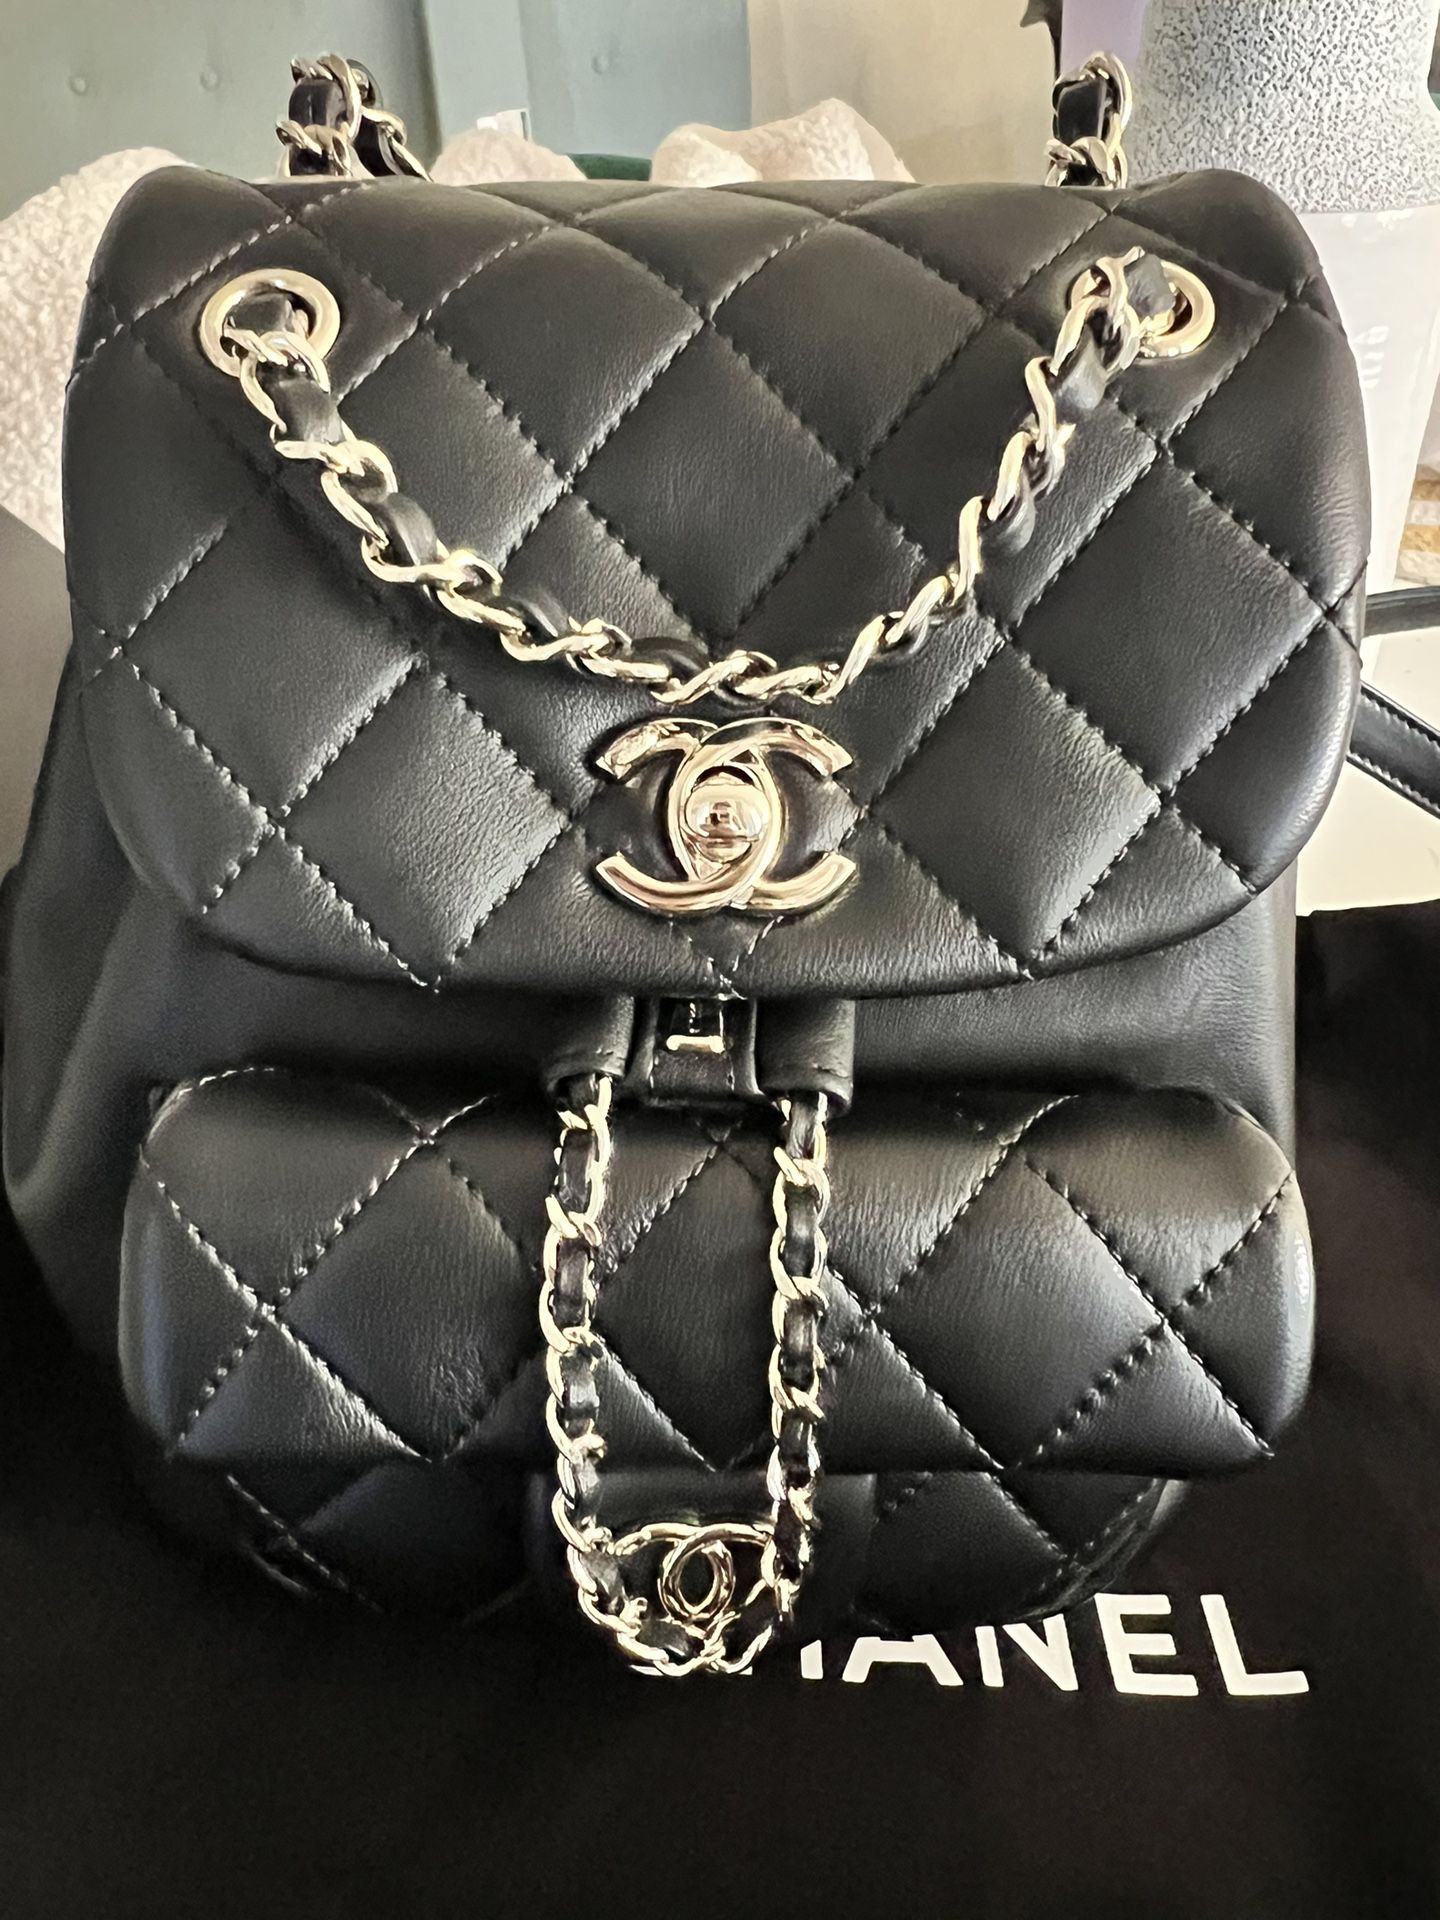 Chanel Purse Backpack